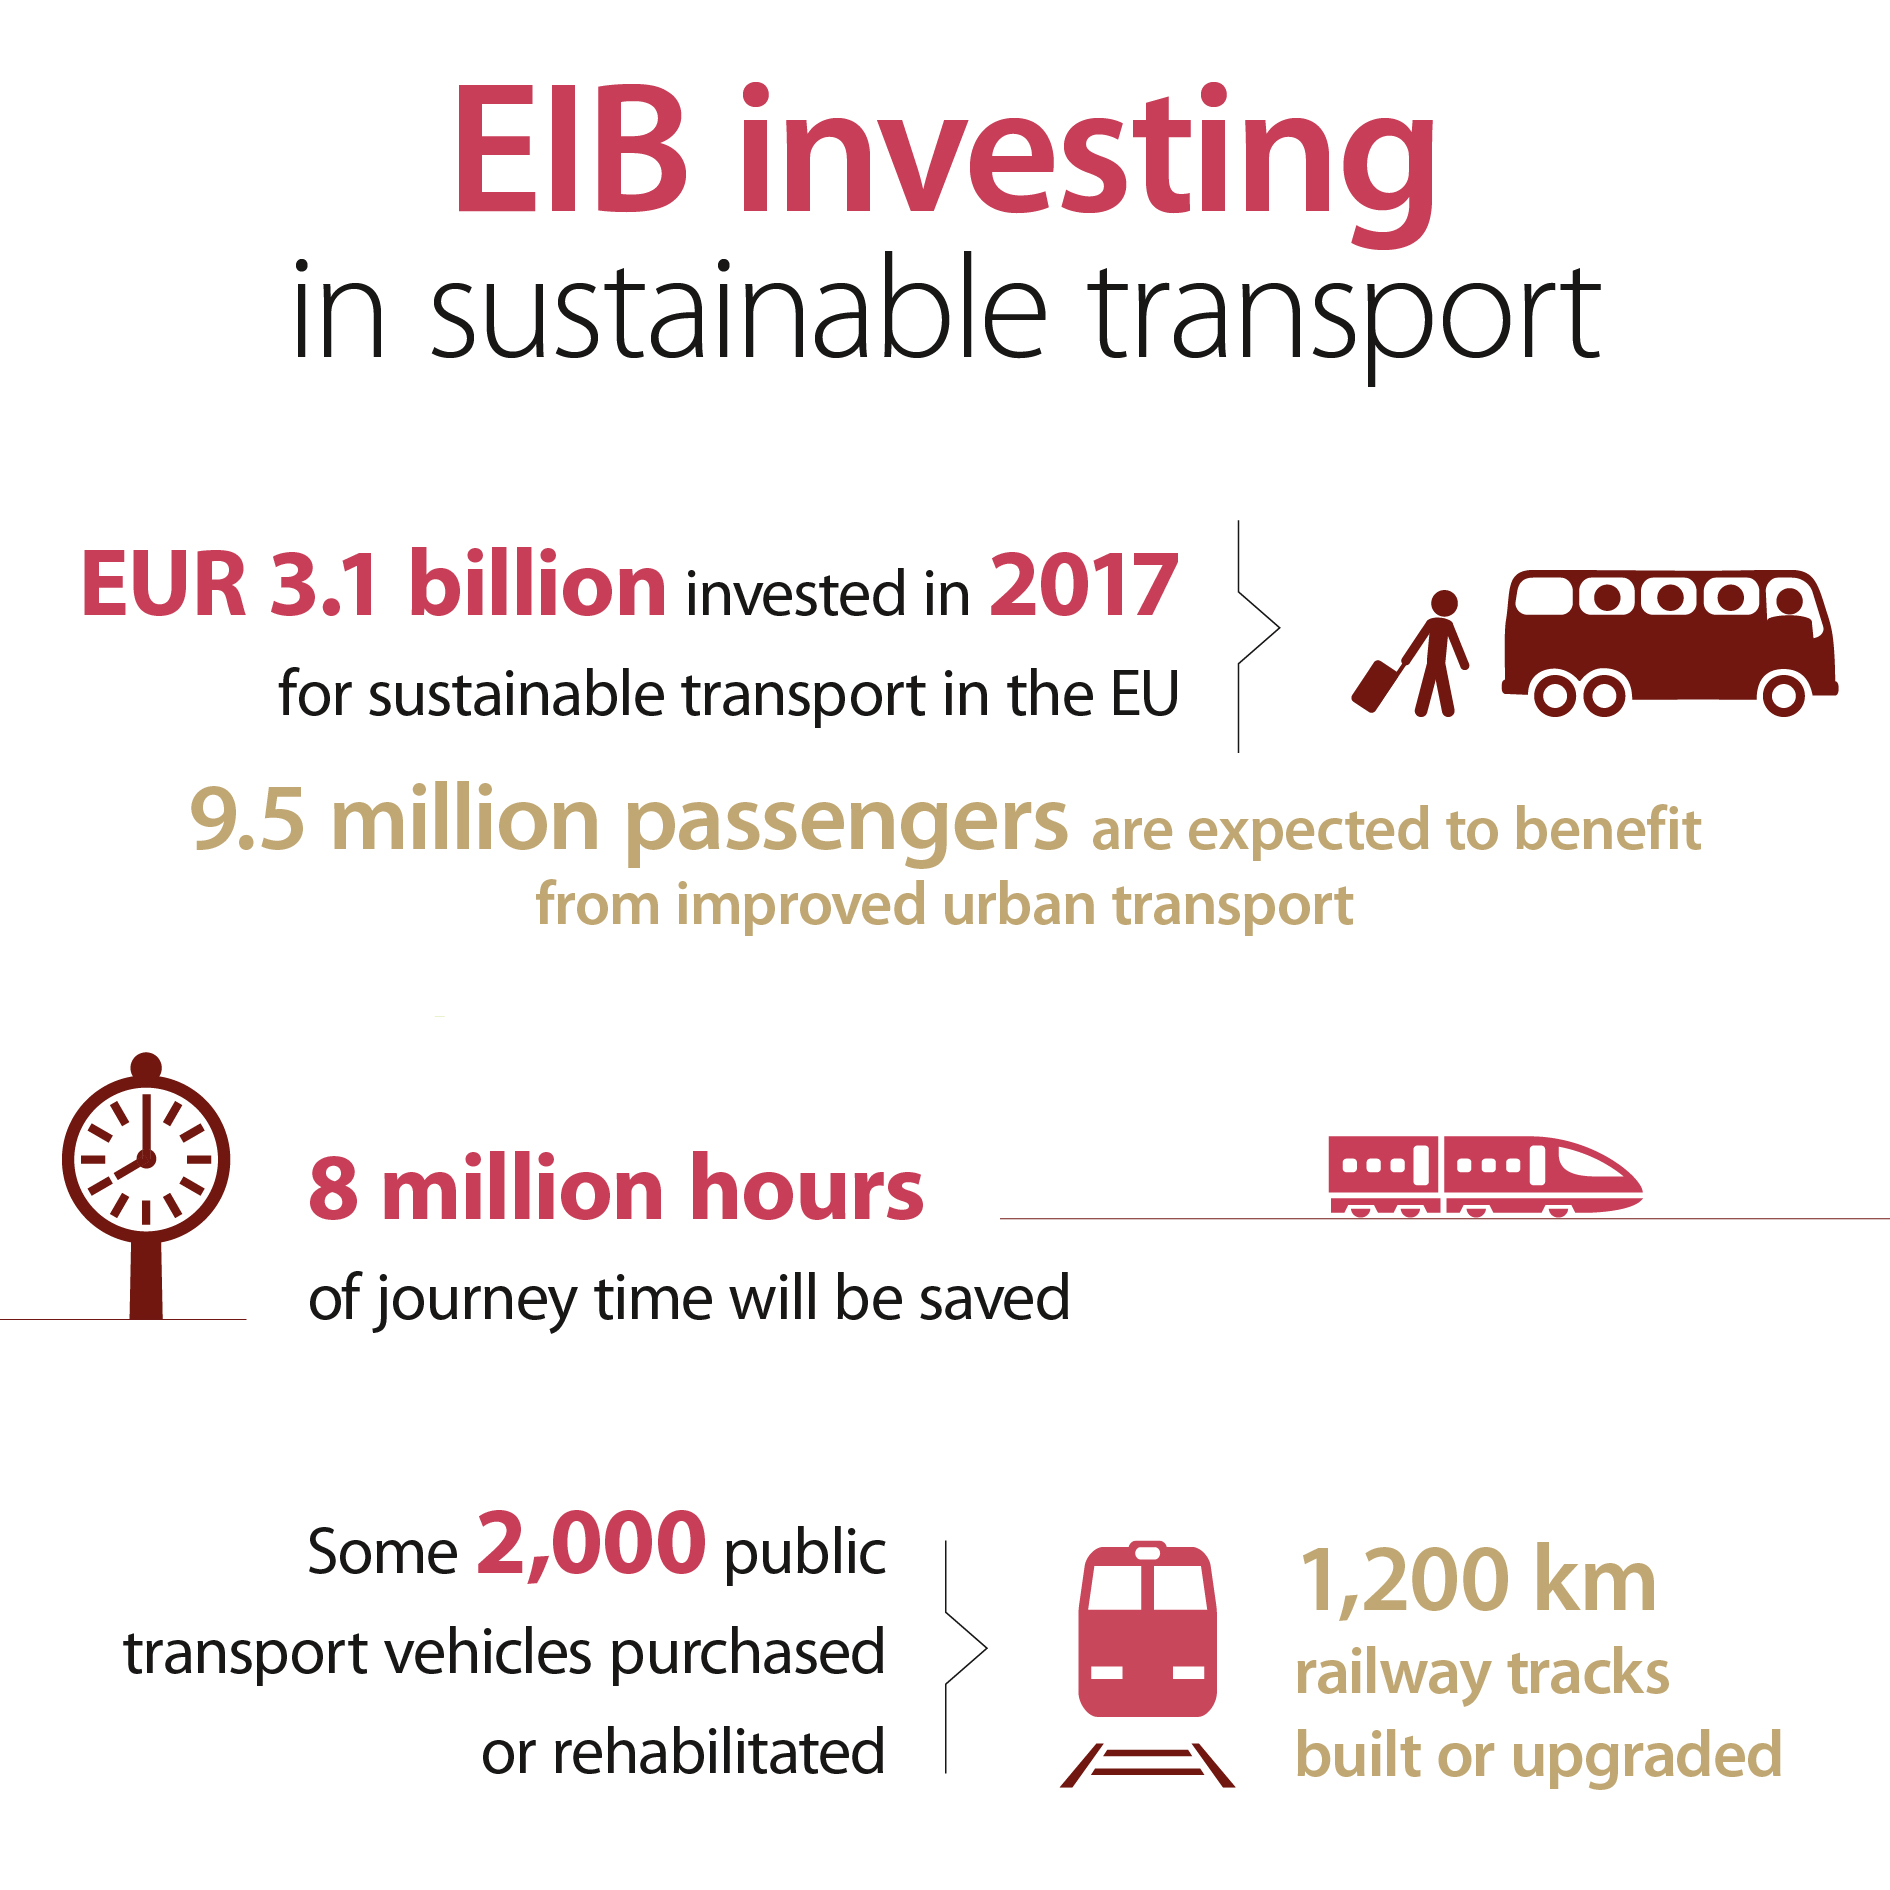 EIB investing in sustainable transports